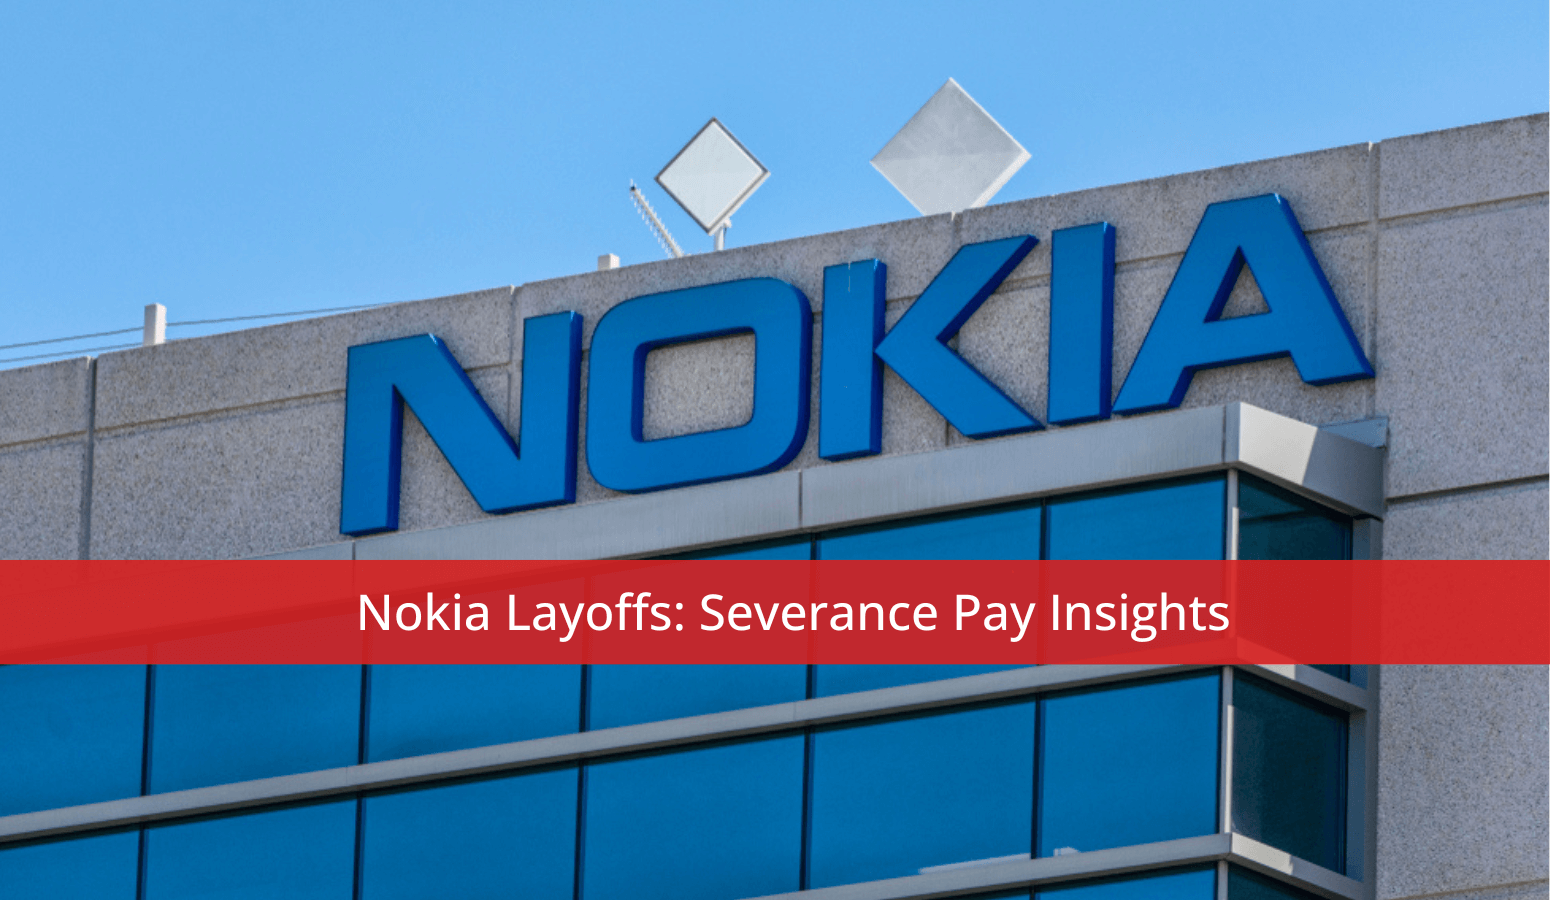 Featured image for “Nokia Layoffs: Severance Pay Insights”